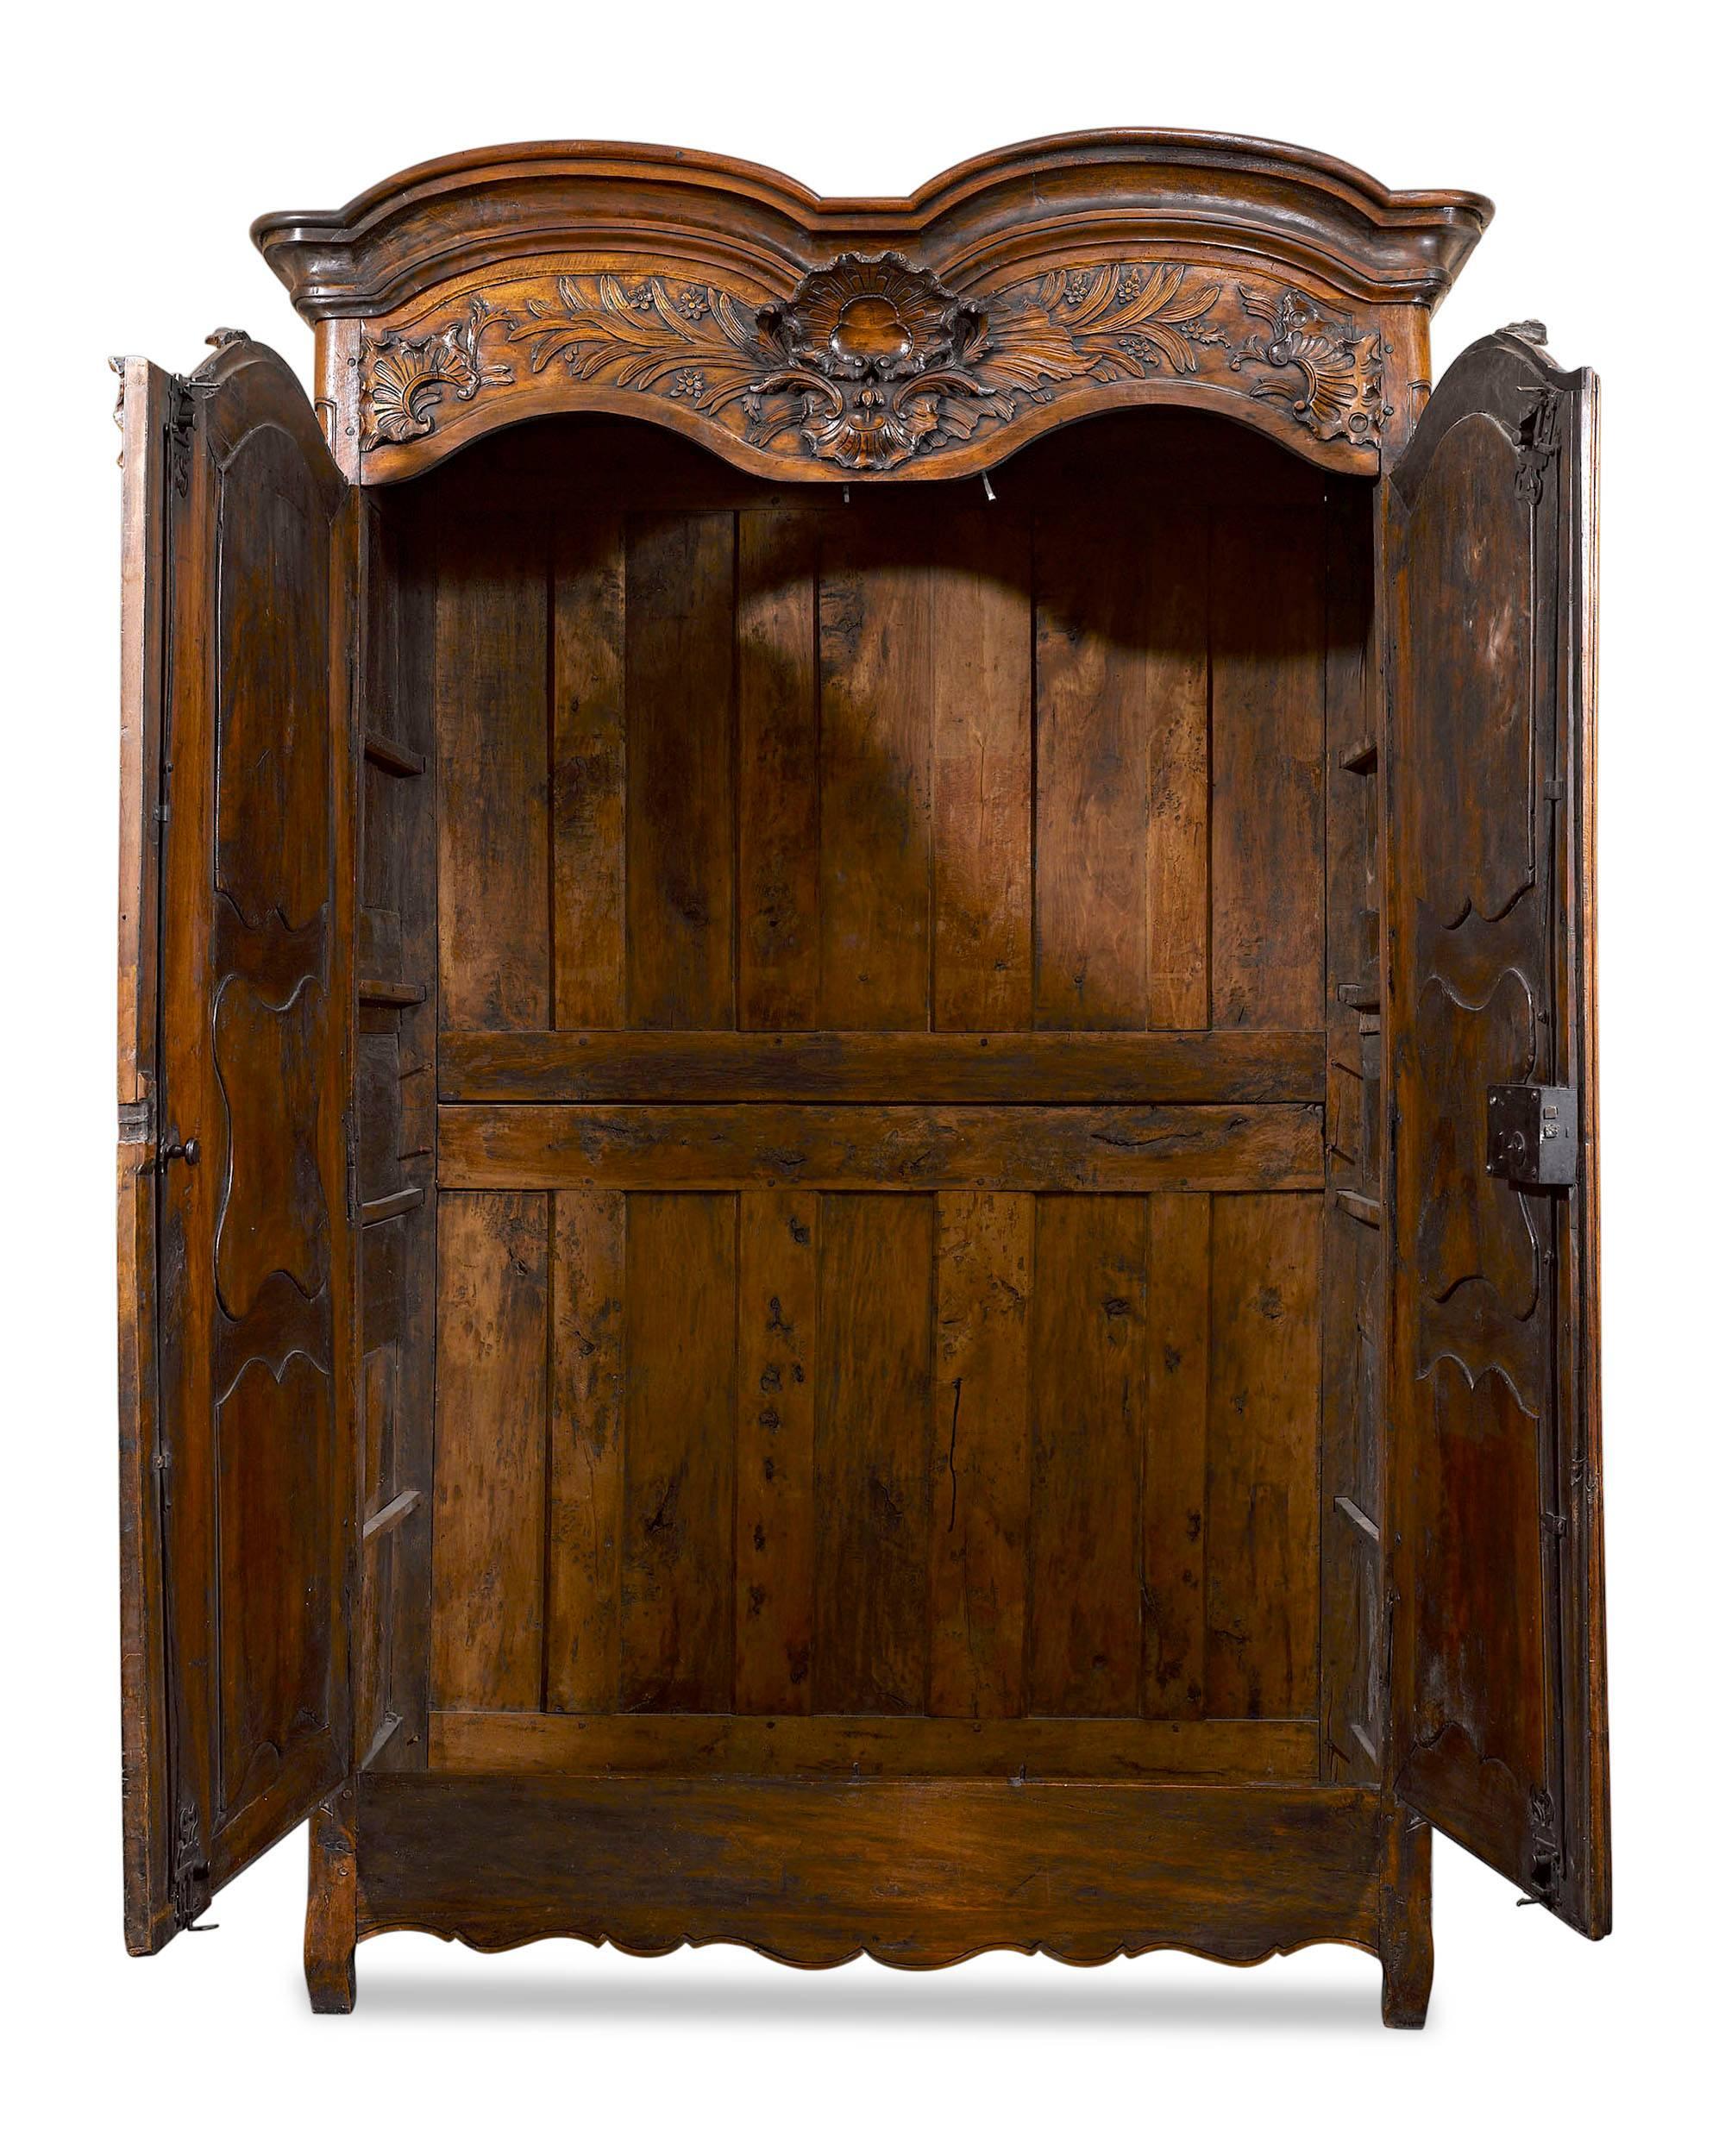 This majestic French walnut armoire is a stunning example of the Provincial style. Standing nearly nine feet high, this rare armoire featuring splendid rocaille carvings above its double doors and a wonderfully rich patina. Original mountings,